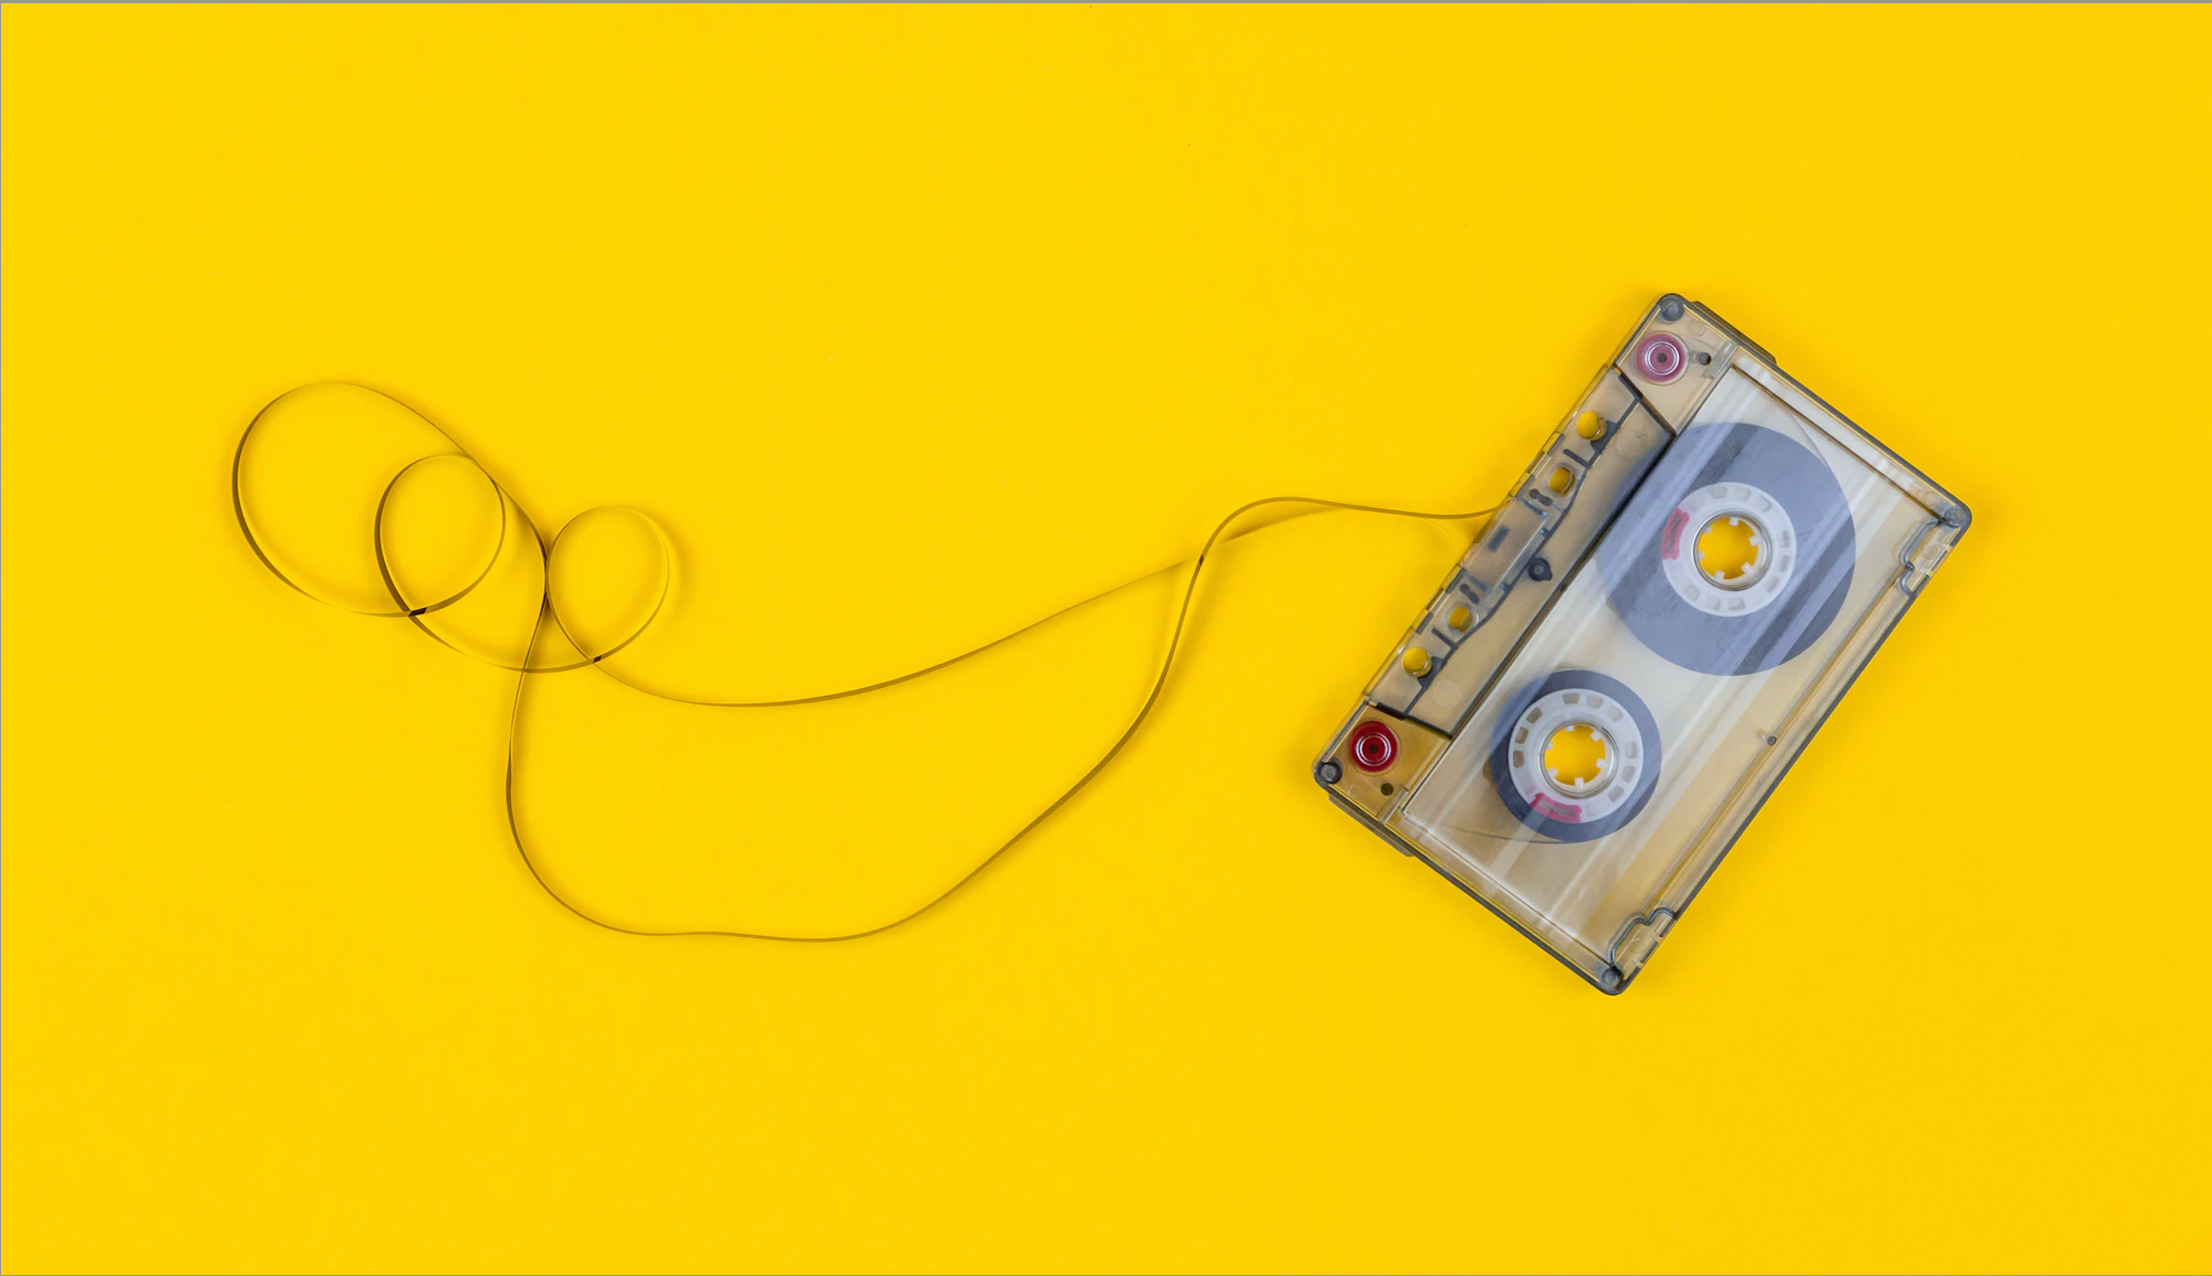 A cassette tape with the ribbon unravelled lies flat on a yellow background.